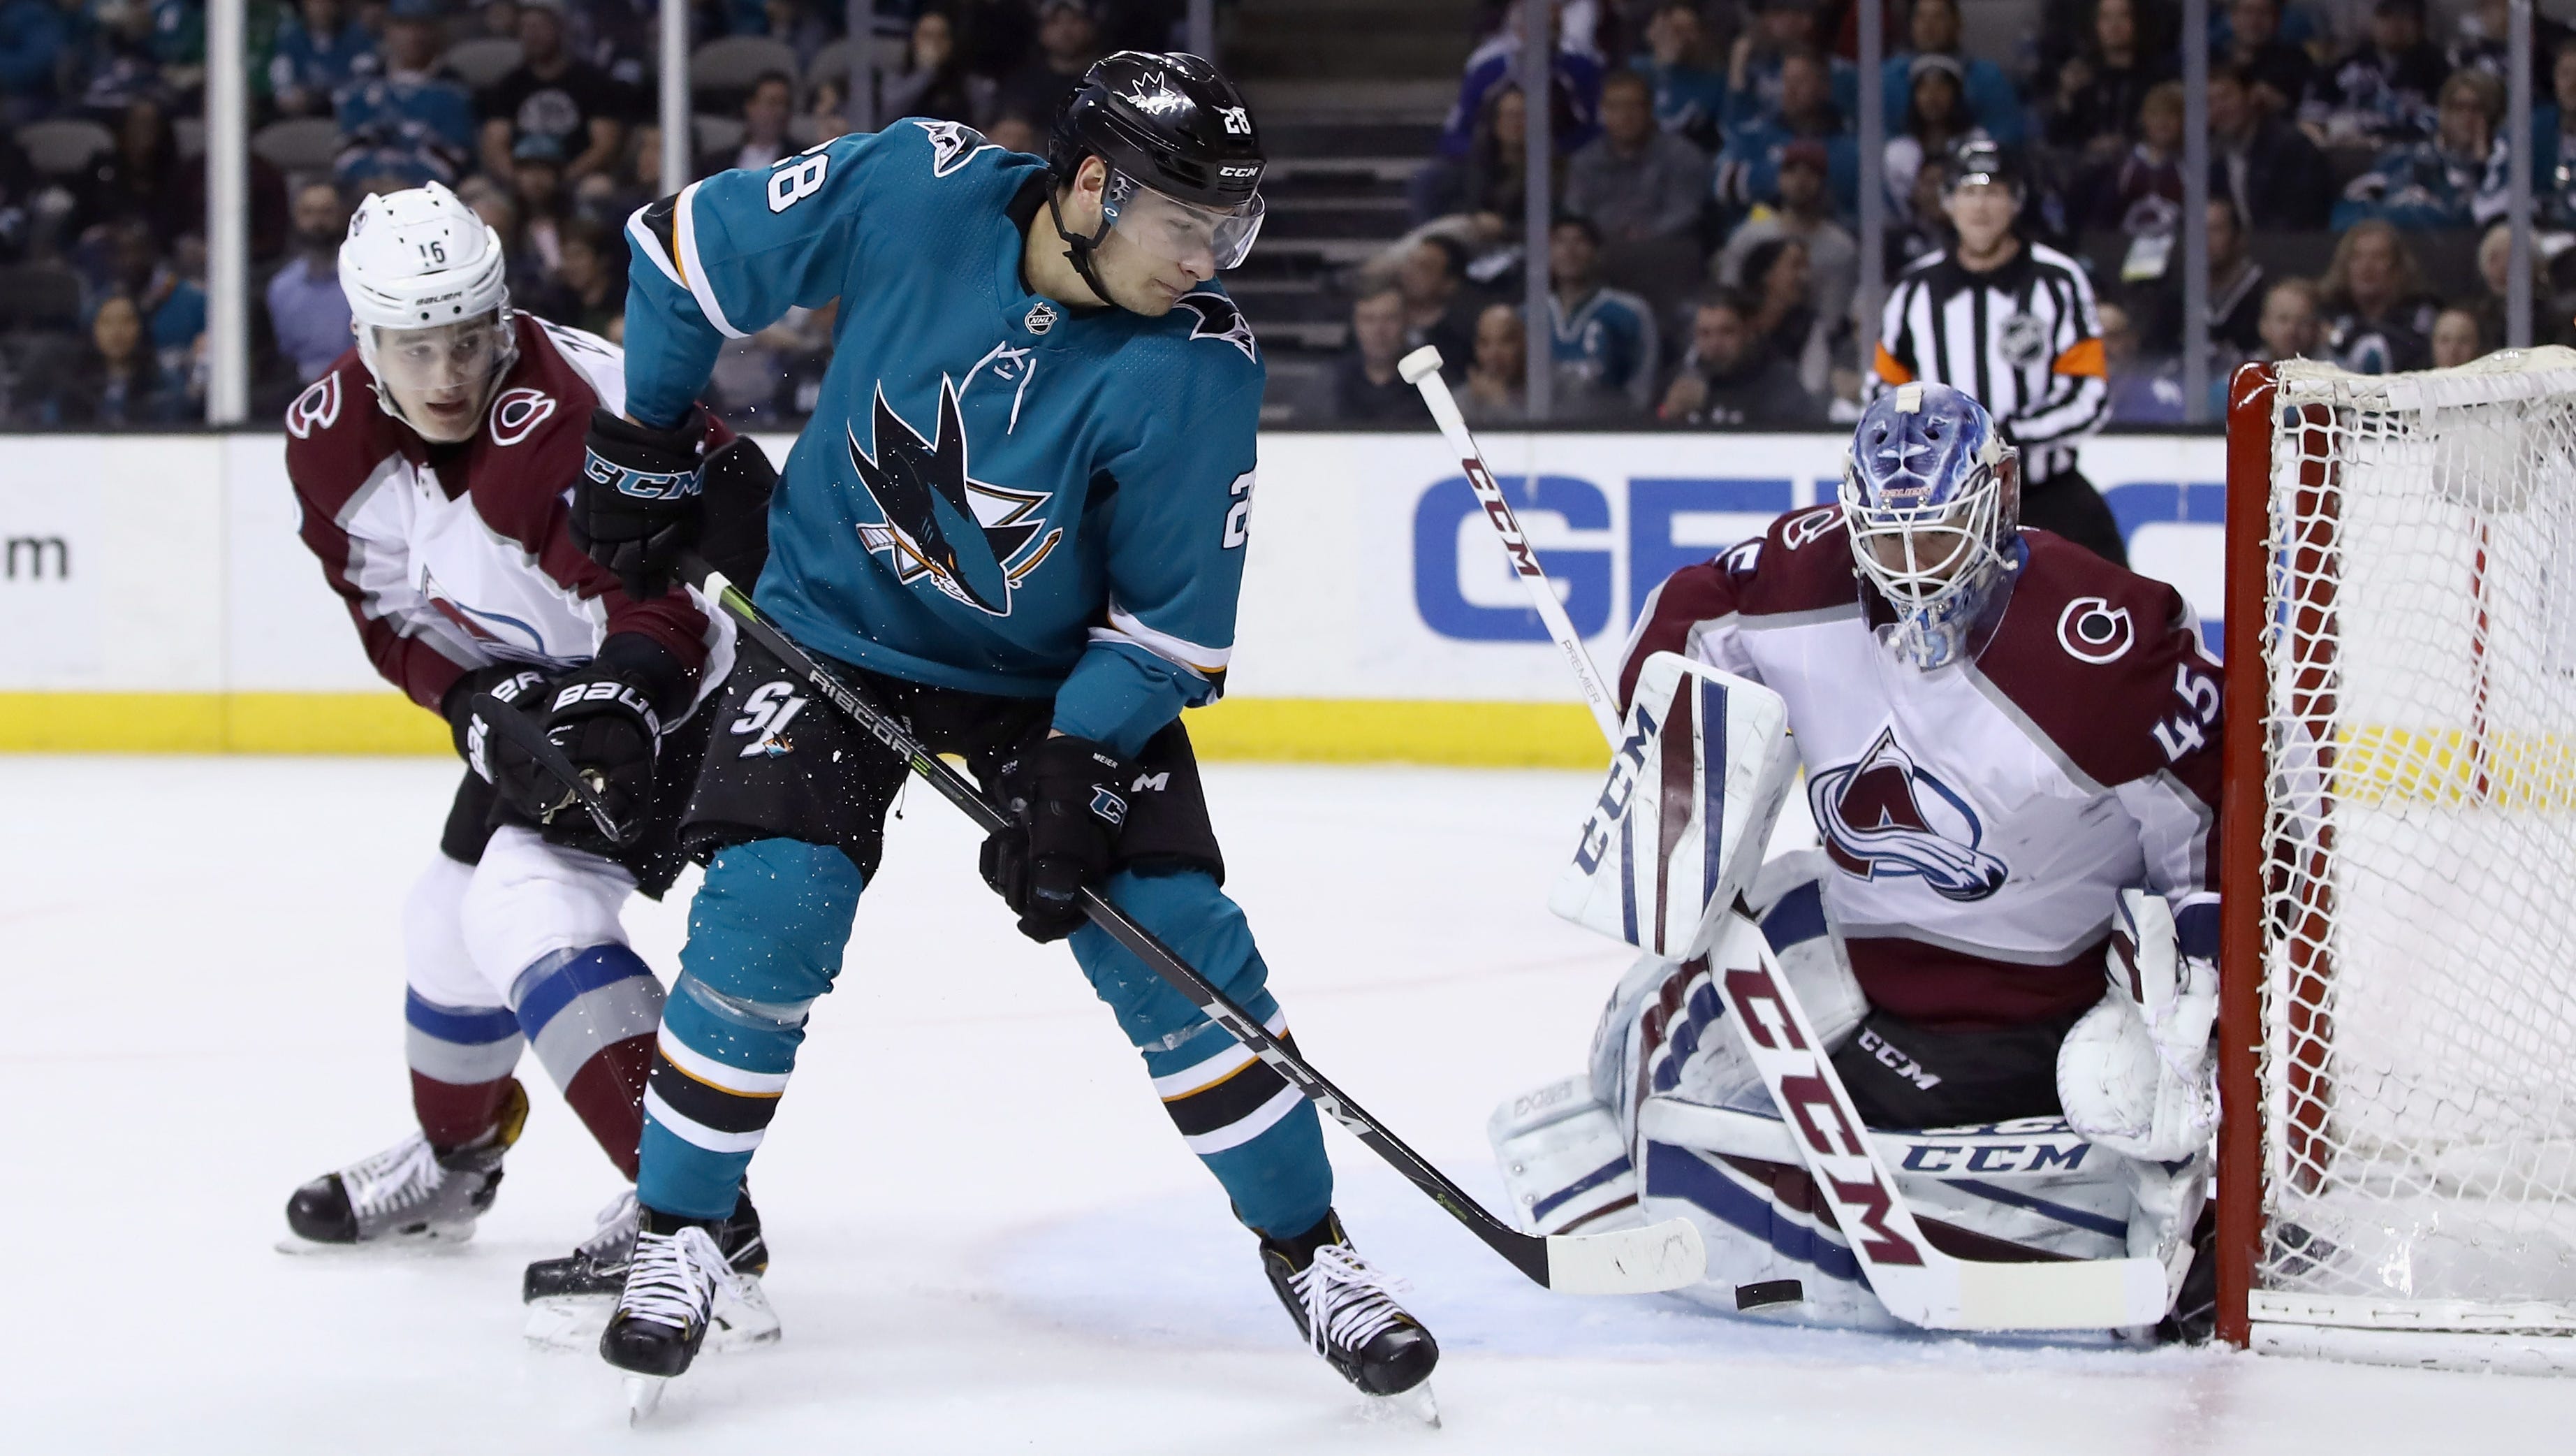 Jonathan Bernier of the Colorado Avalanche makes a save on a shot taken by Timo Meier of the San Jose Sharks at SAP Center on April 5, 2018 in San Jose, California.